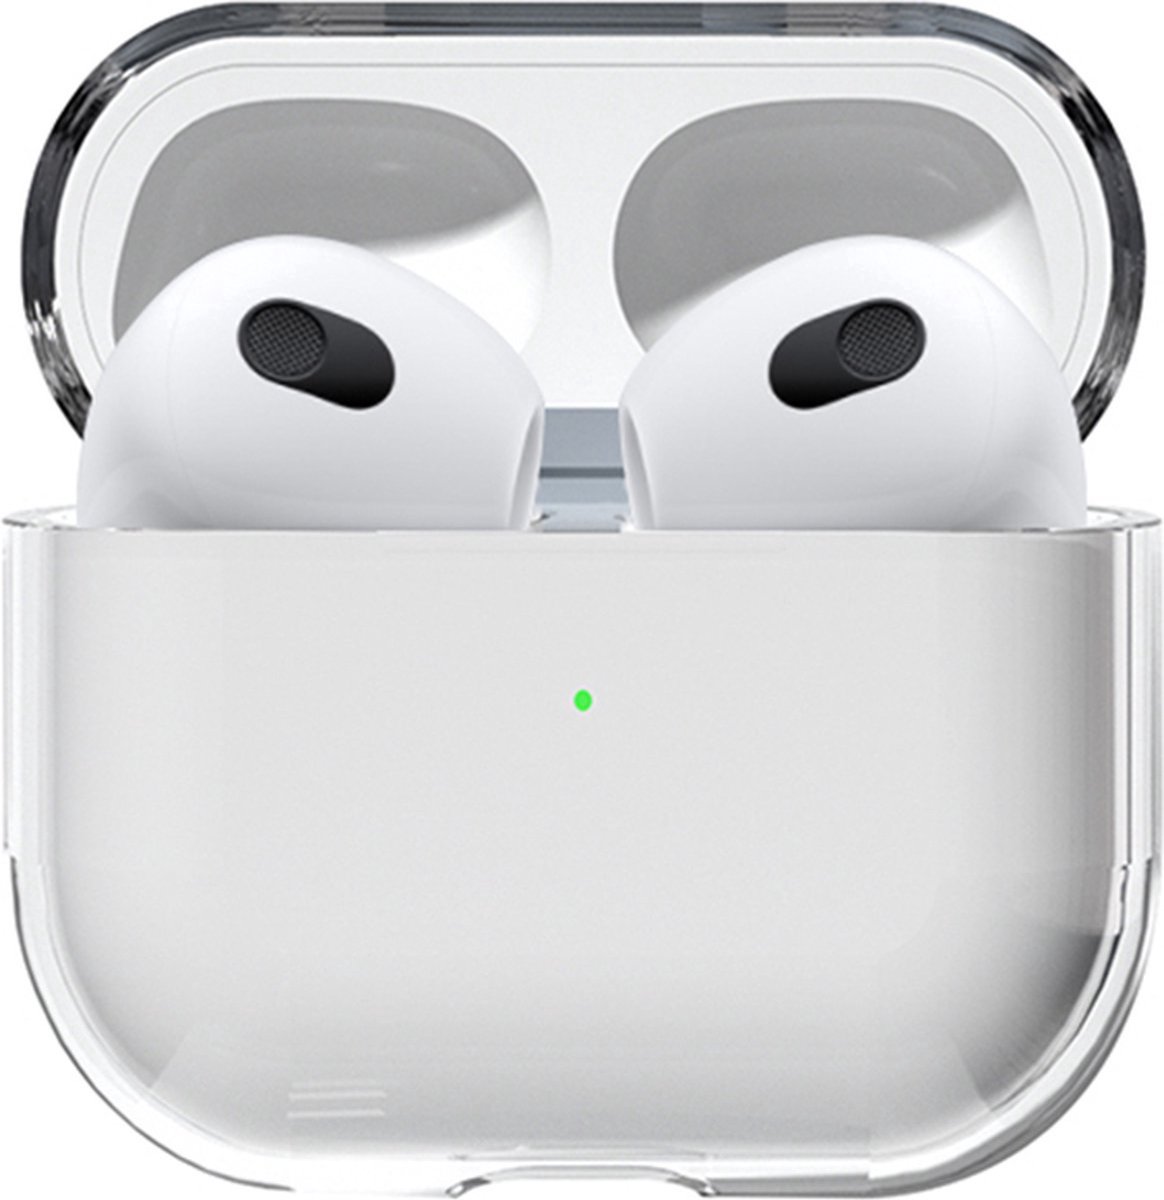 CHPN - Airpodshoesje - Transparant - Siliconen Beschermhoesje - Airpodshoesje - Geschikt voor Apple AirPods - AirPods 3